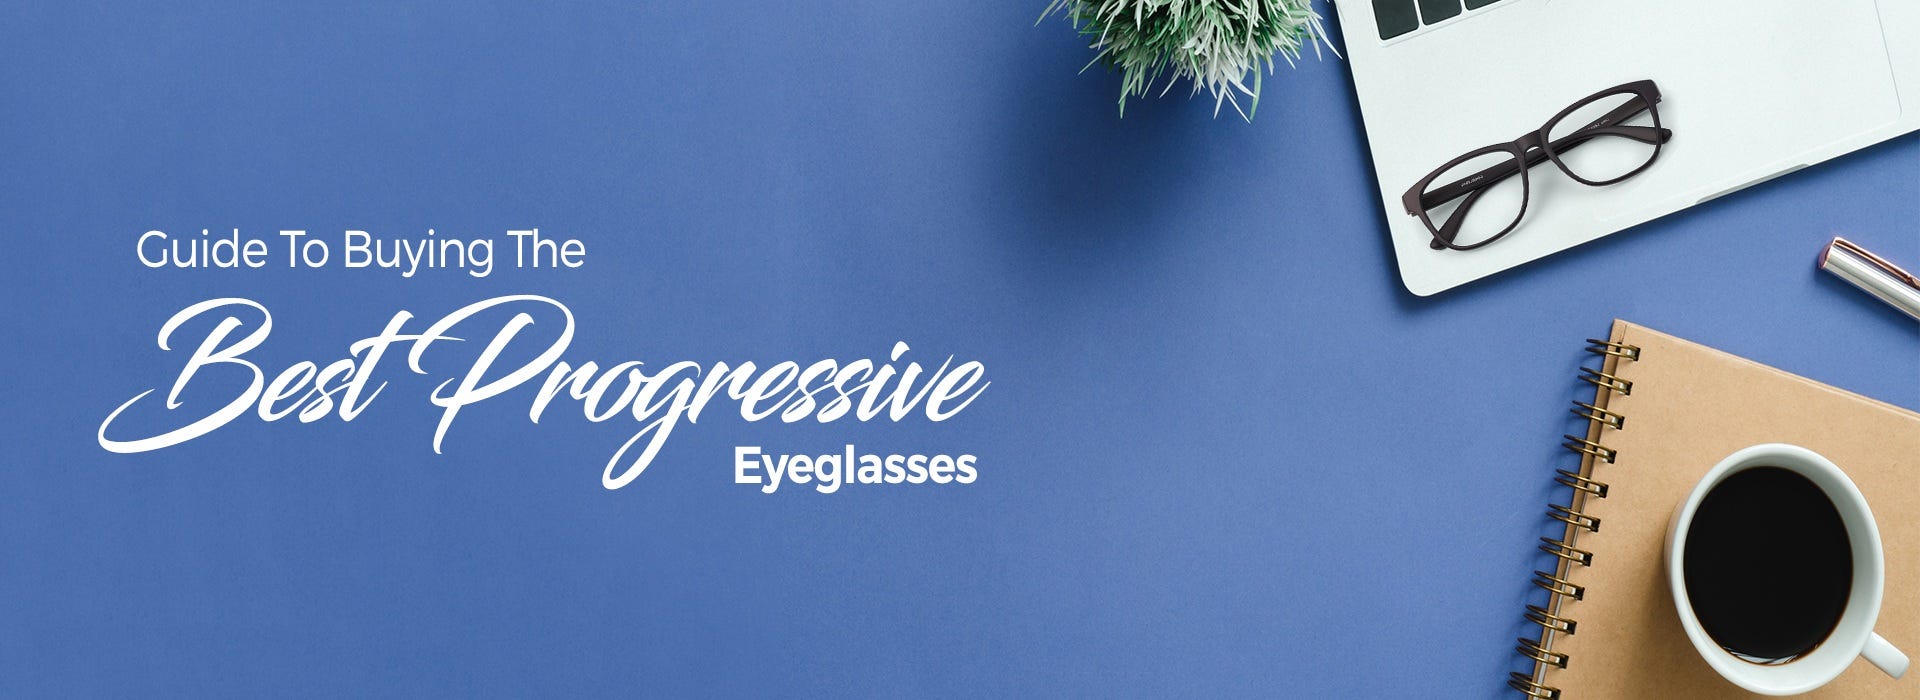 GUIDE TO BUYING THE BEST PROGRESSIVE EYEGLASSES